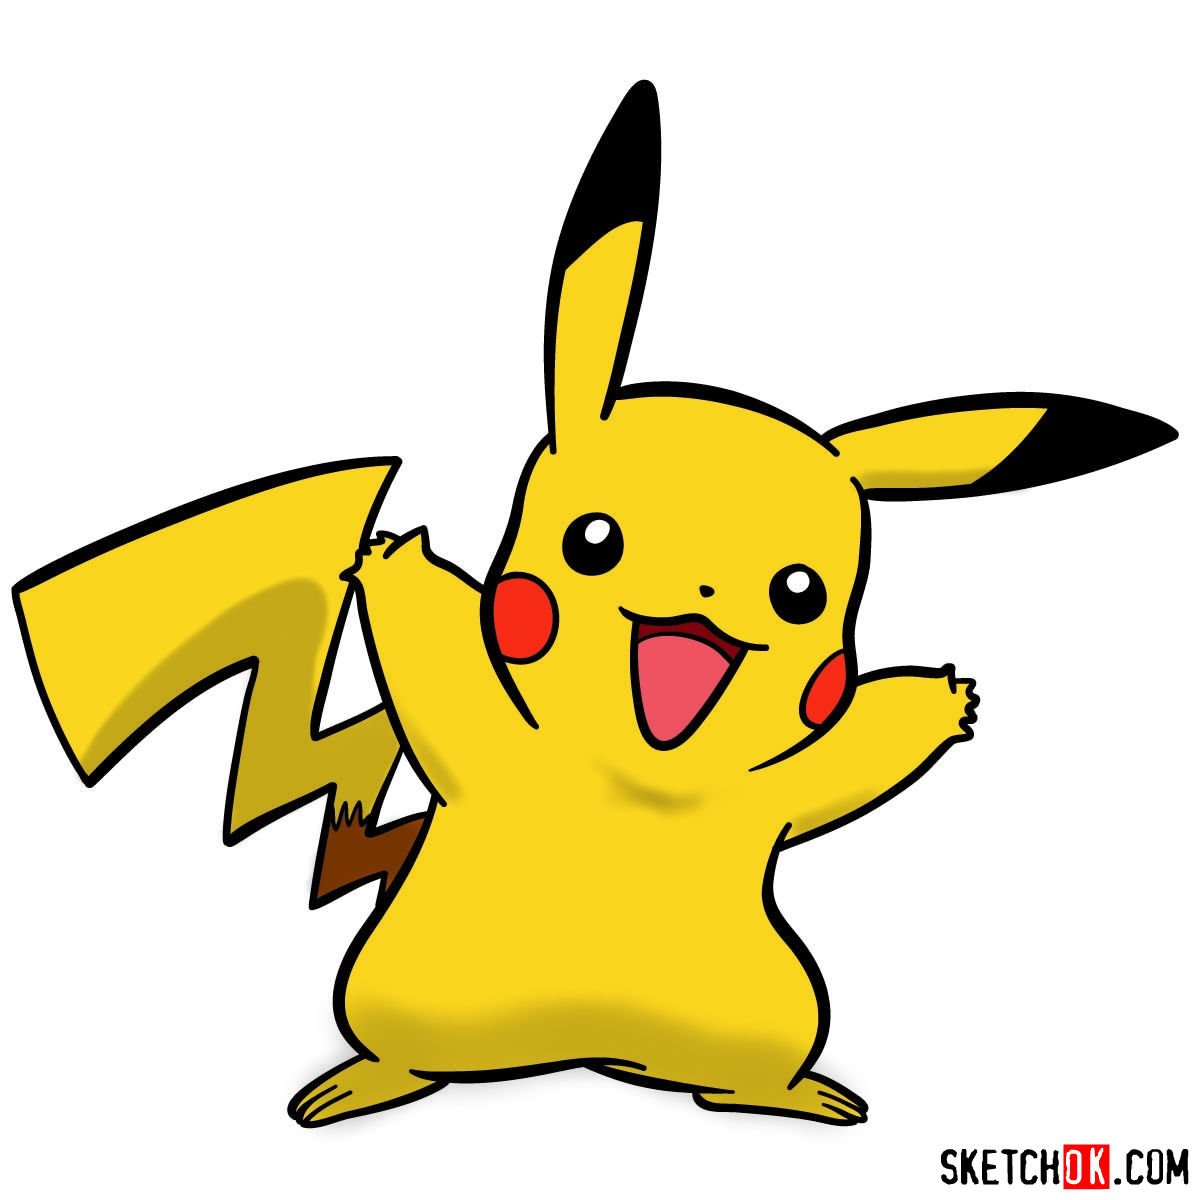 How to draw Pikachu Pokemon with arms wide open